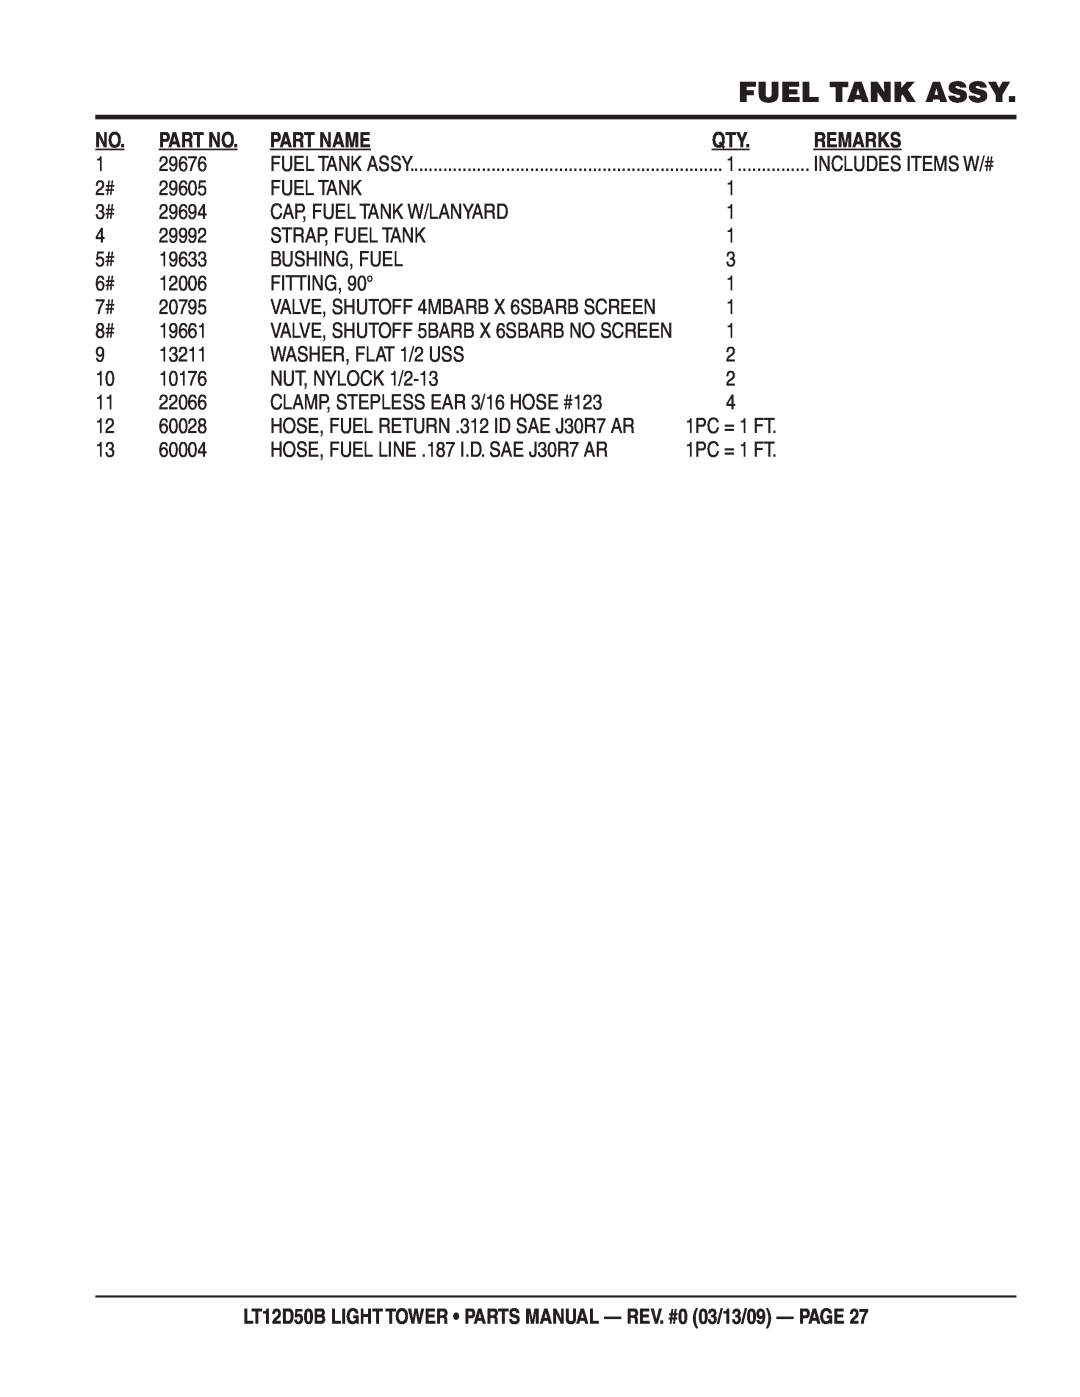 Multiquip manual Fuel Tank Assy, Part Name, Remarks, LT12D50B LIGHT TOWER PARTS MANUAL - REV. #0 03/13/09 - PAGE 